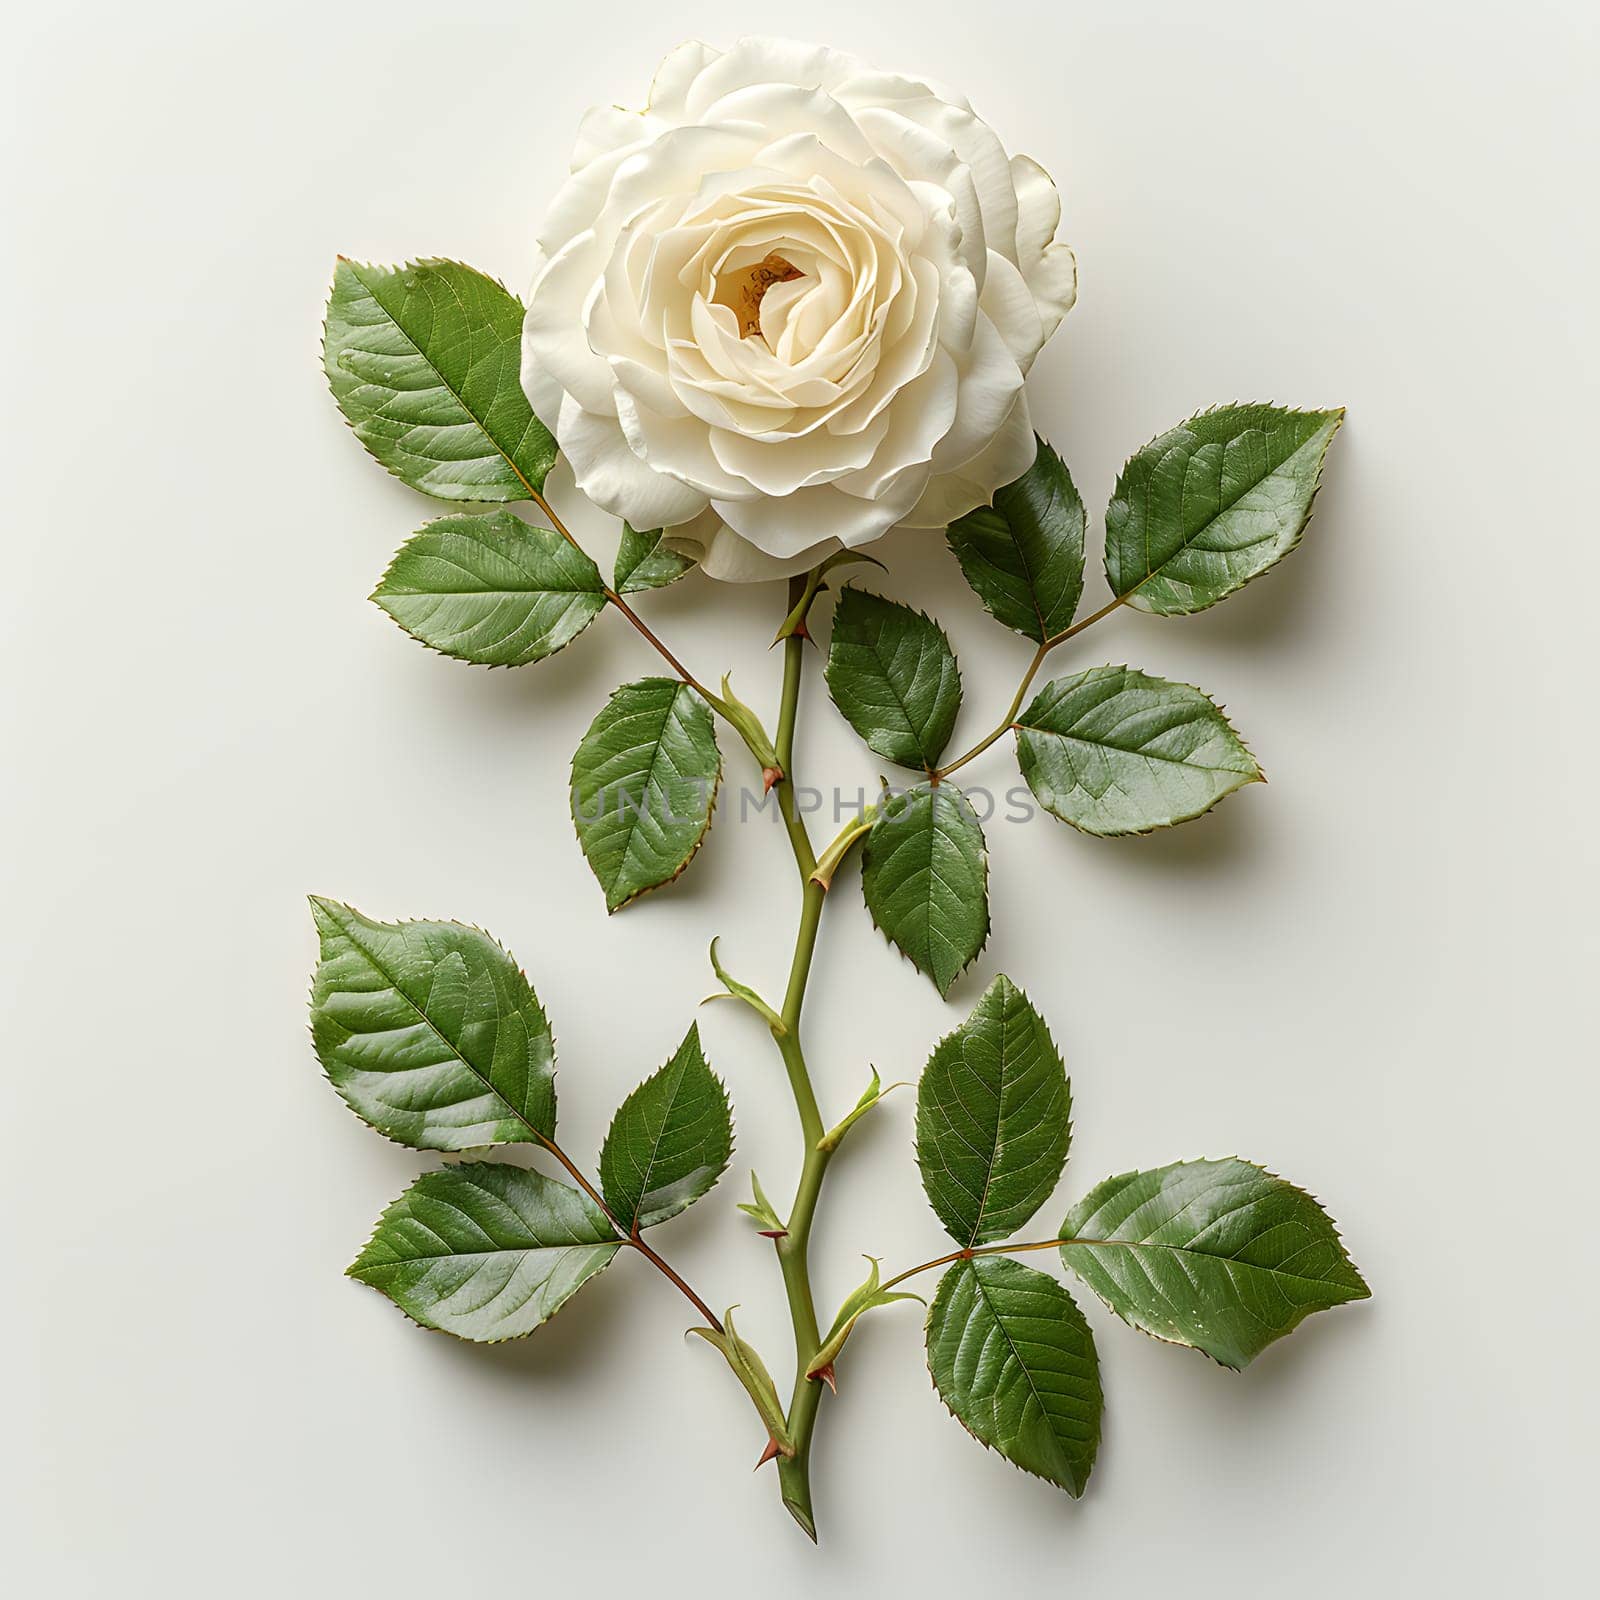 A hybrid tea rose, symbol of purity and innocence, with white petals and green leaves, belongs to the Rose family. Often used in creative arts, gardens, or as cut flowers